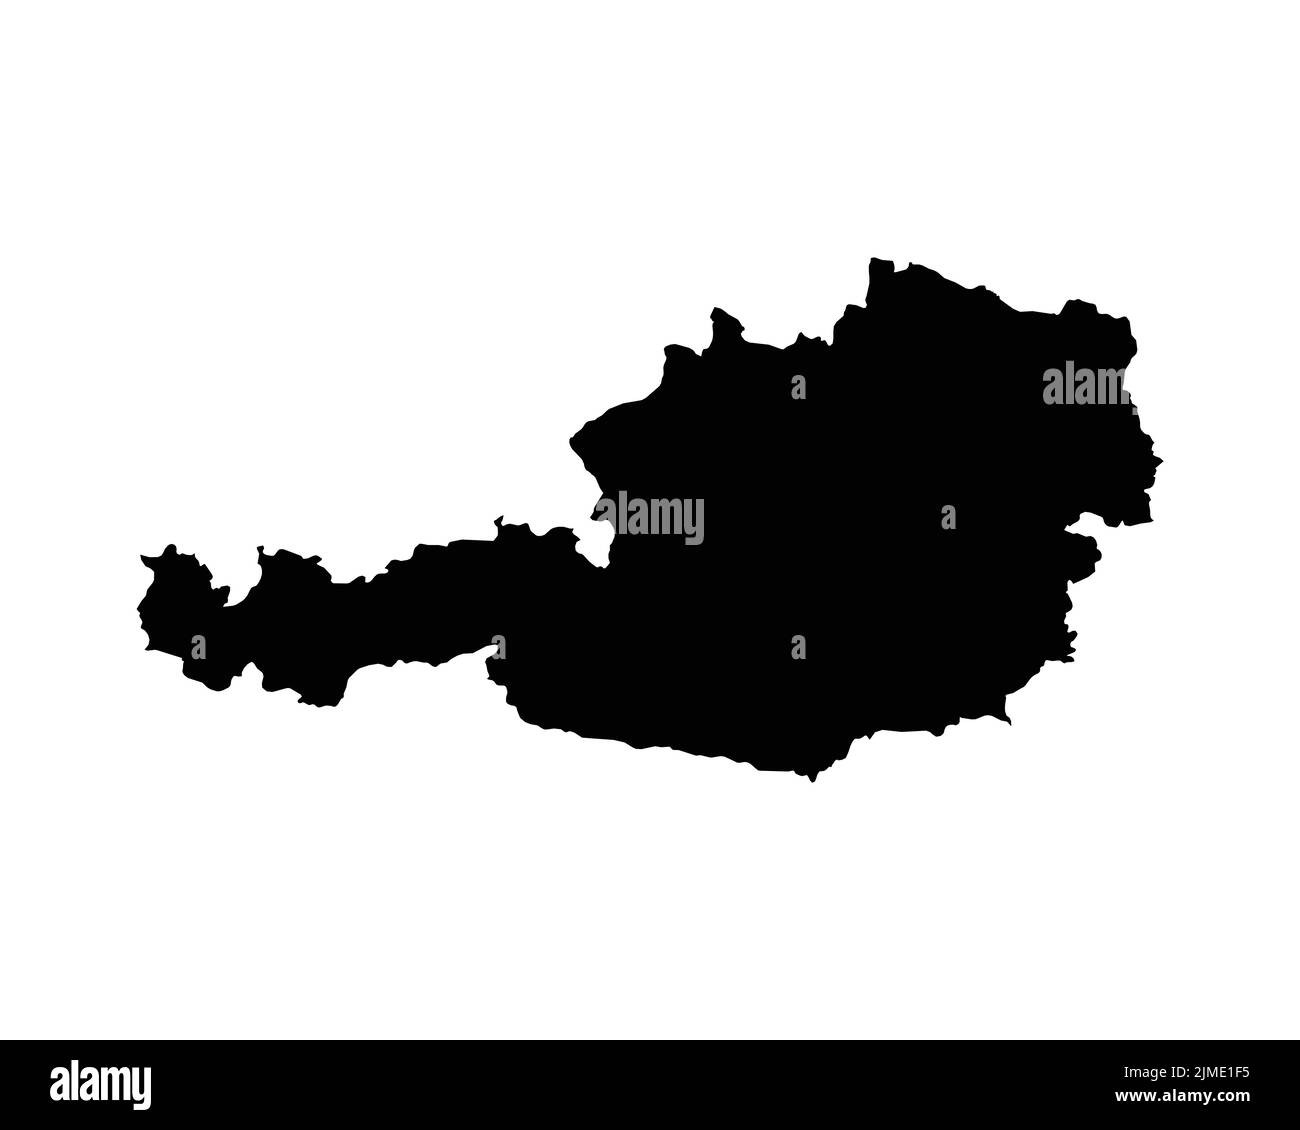 Austria Map. Austrian Country Map. Black and White National Outline Boundary Border Shape Geography Territory EPS Vector Illustration Clipart Stock Vector